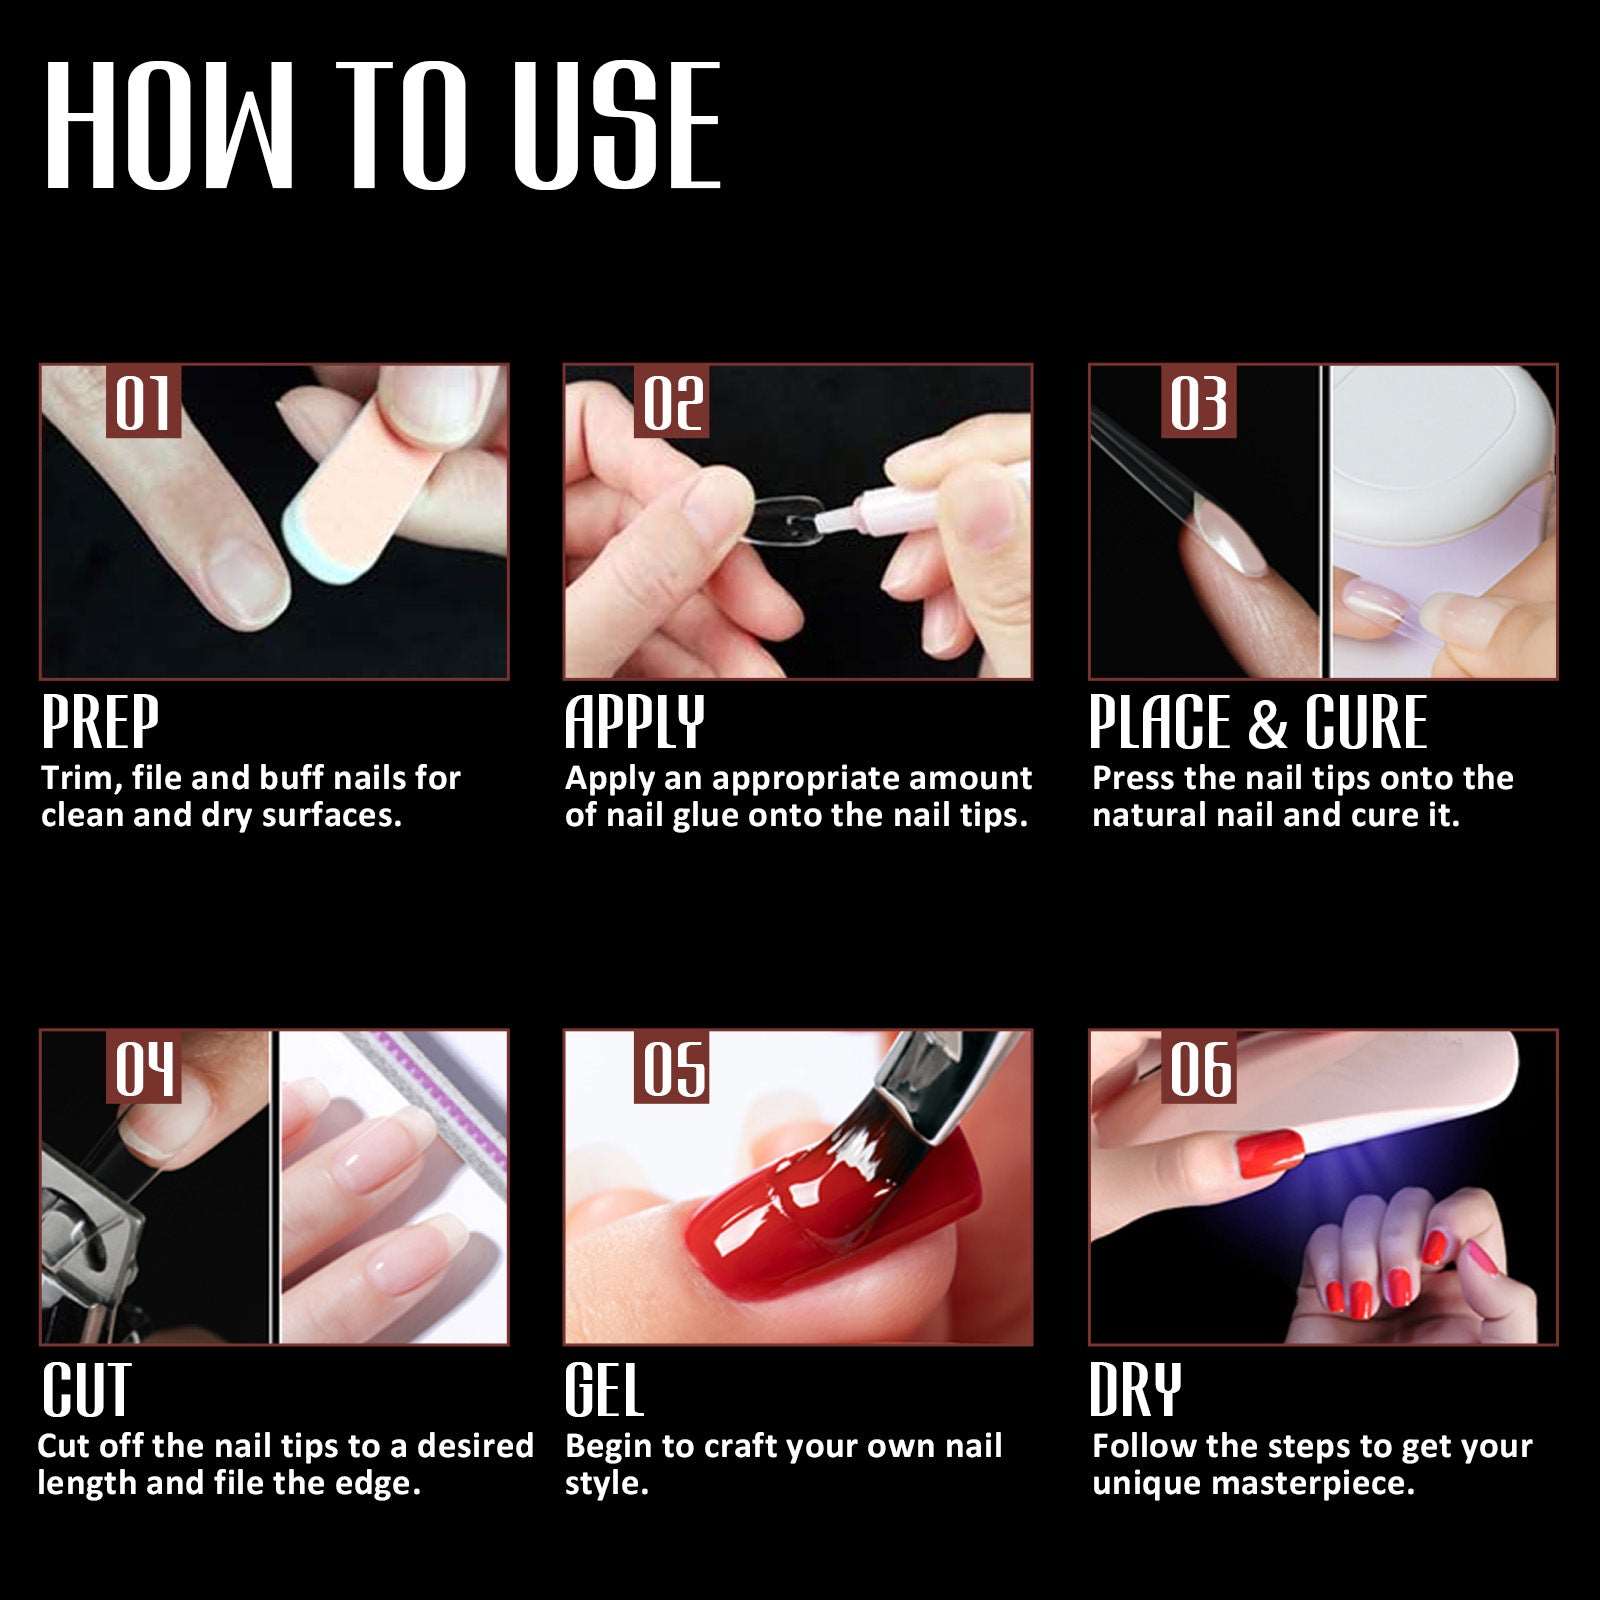 Tips or advice on nail care and manicures. : r/simplynailogical